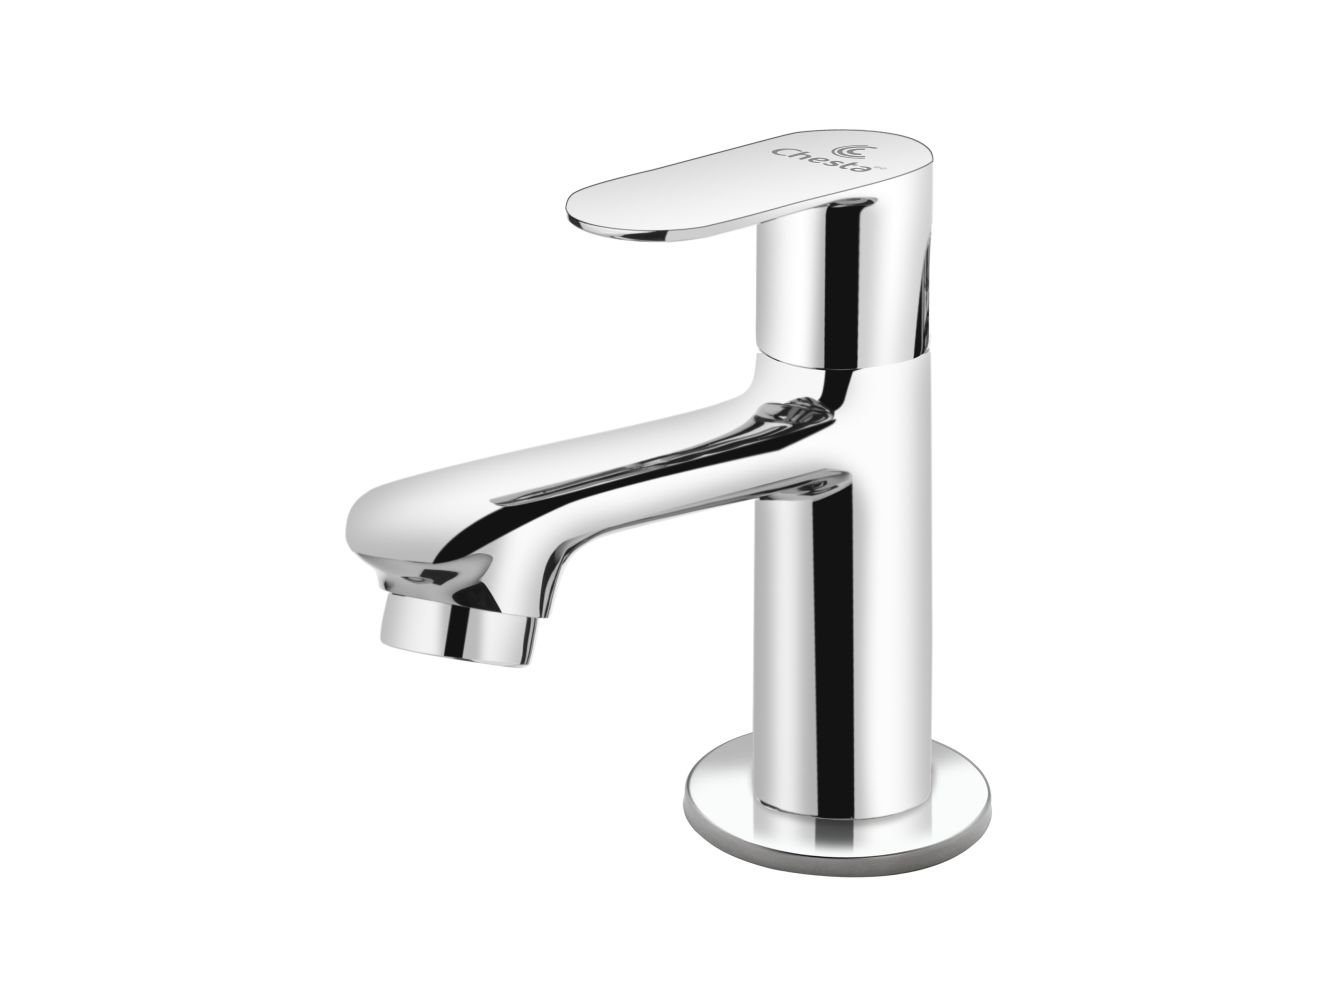 MO - 1005 - Pillar Cock with Flange by Chesta Bath Fittings